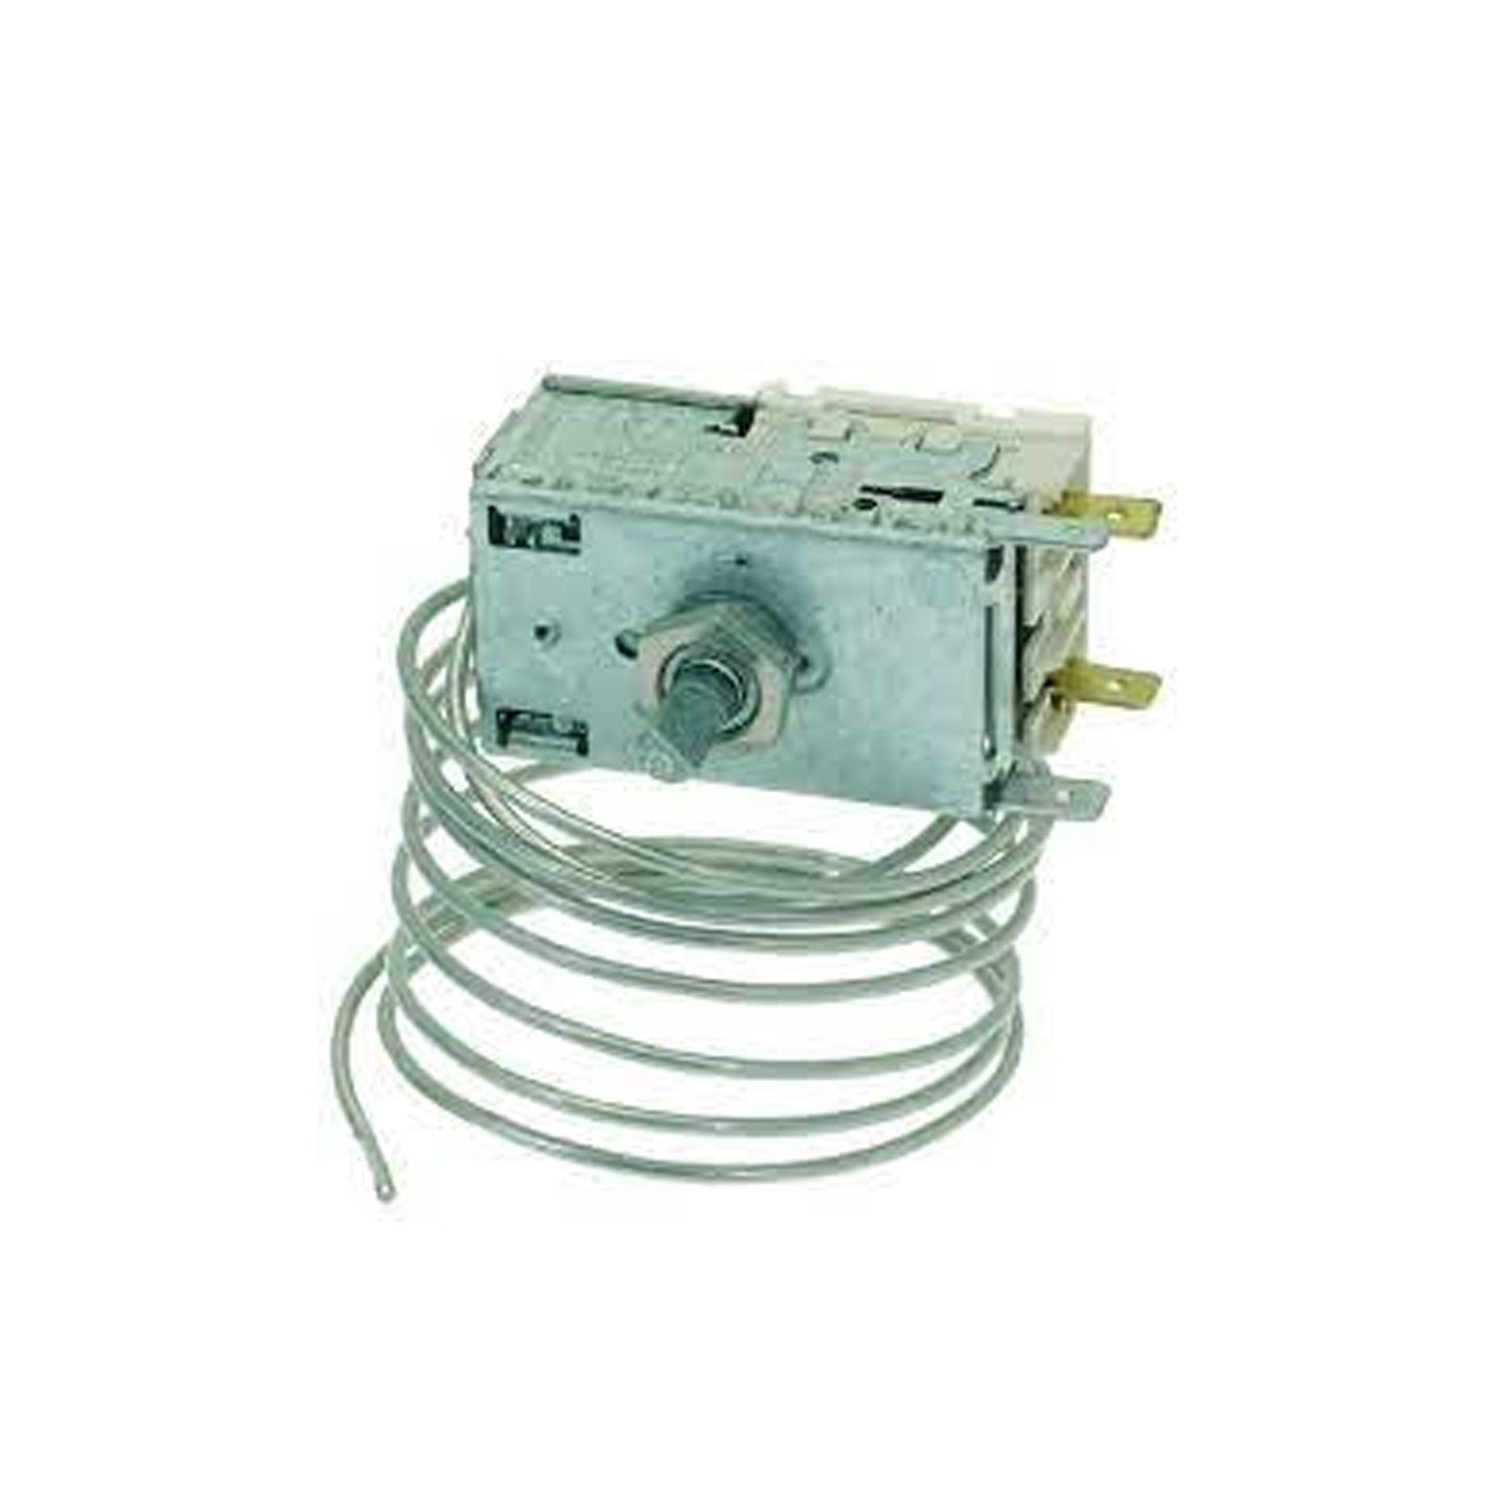 THERMOSTAT RANCO K50-L3429,2 contacts 6A 250V capillary tube 1500 mm crescent-shaped pin ø 6 x 4.6 mm, alternative for DANFOSS 077B1014L